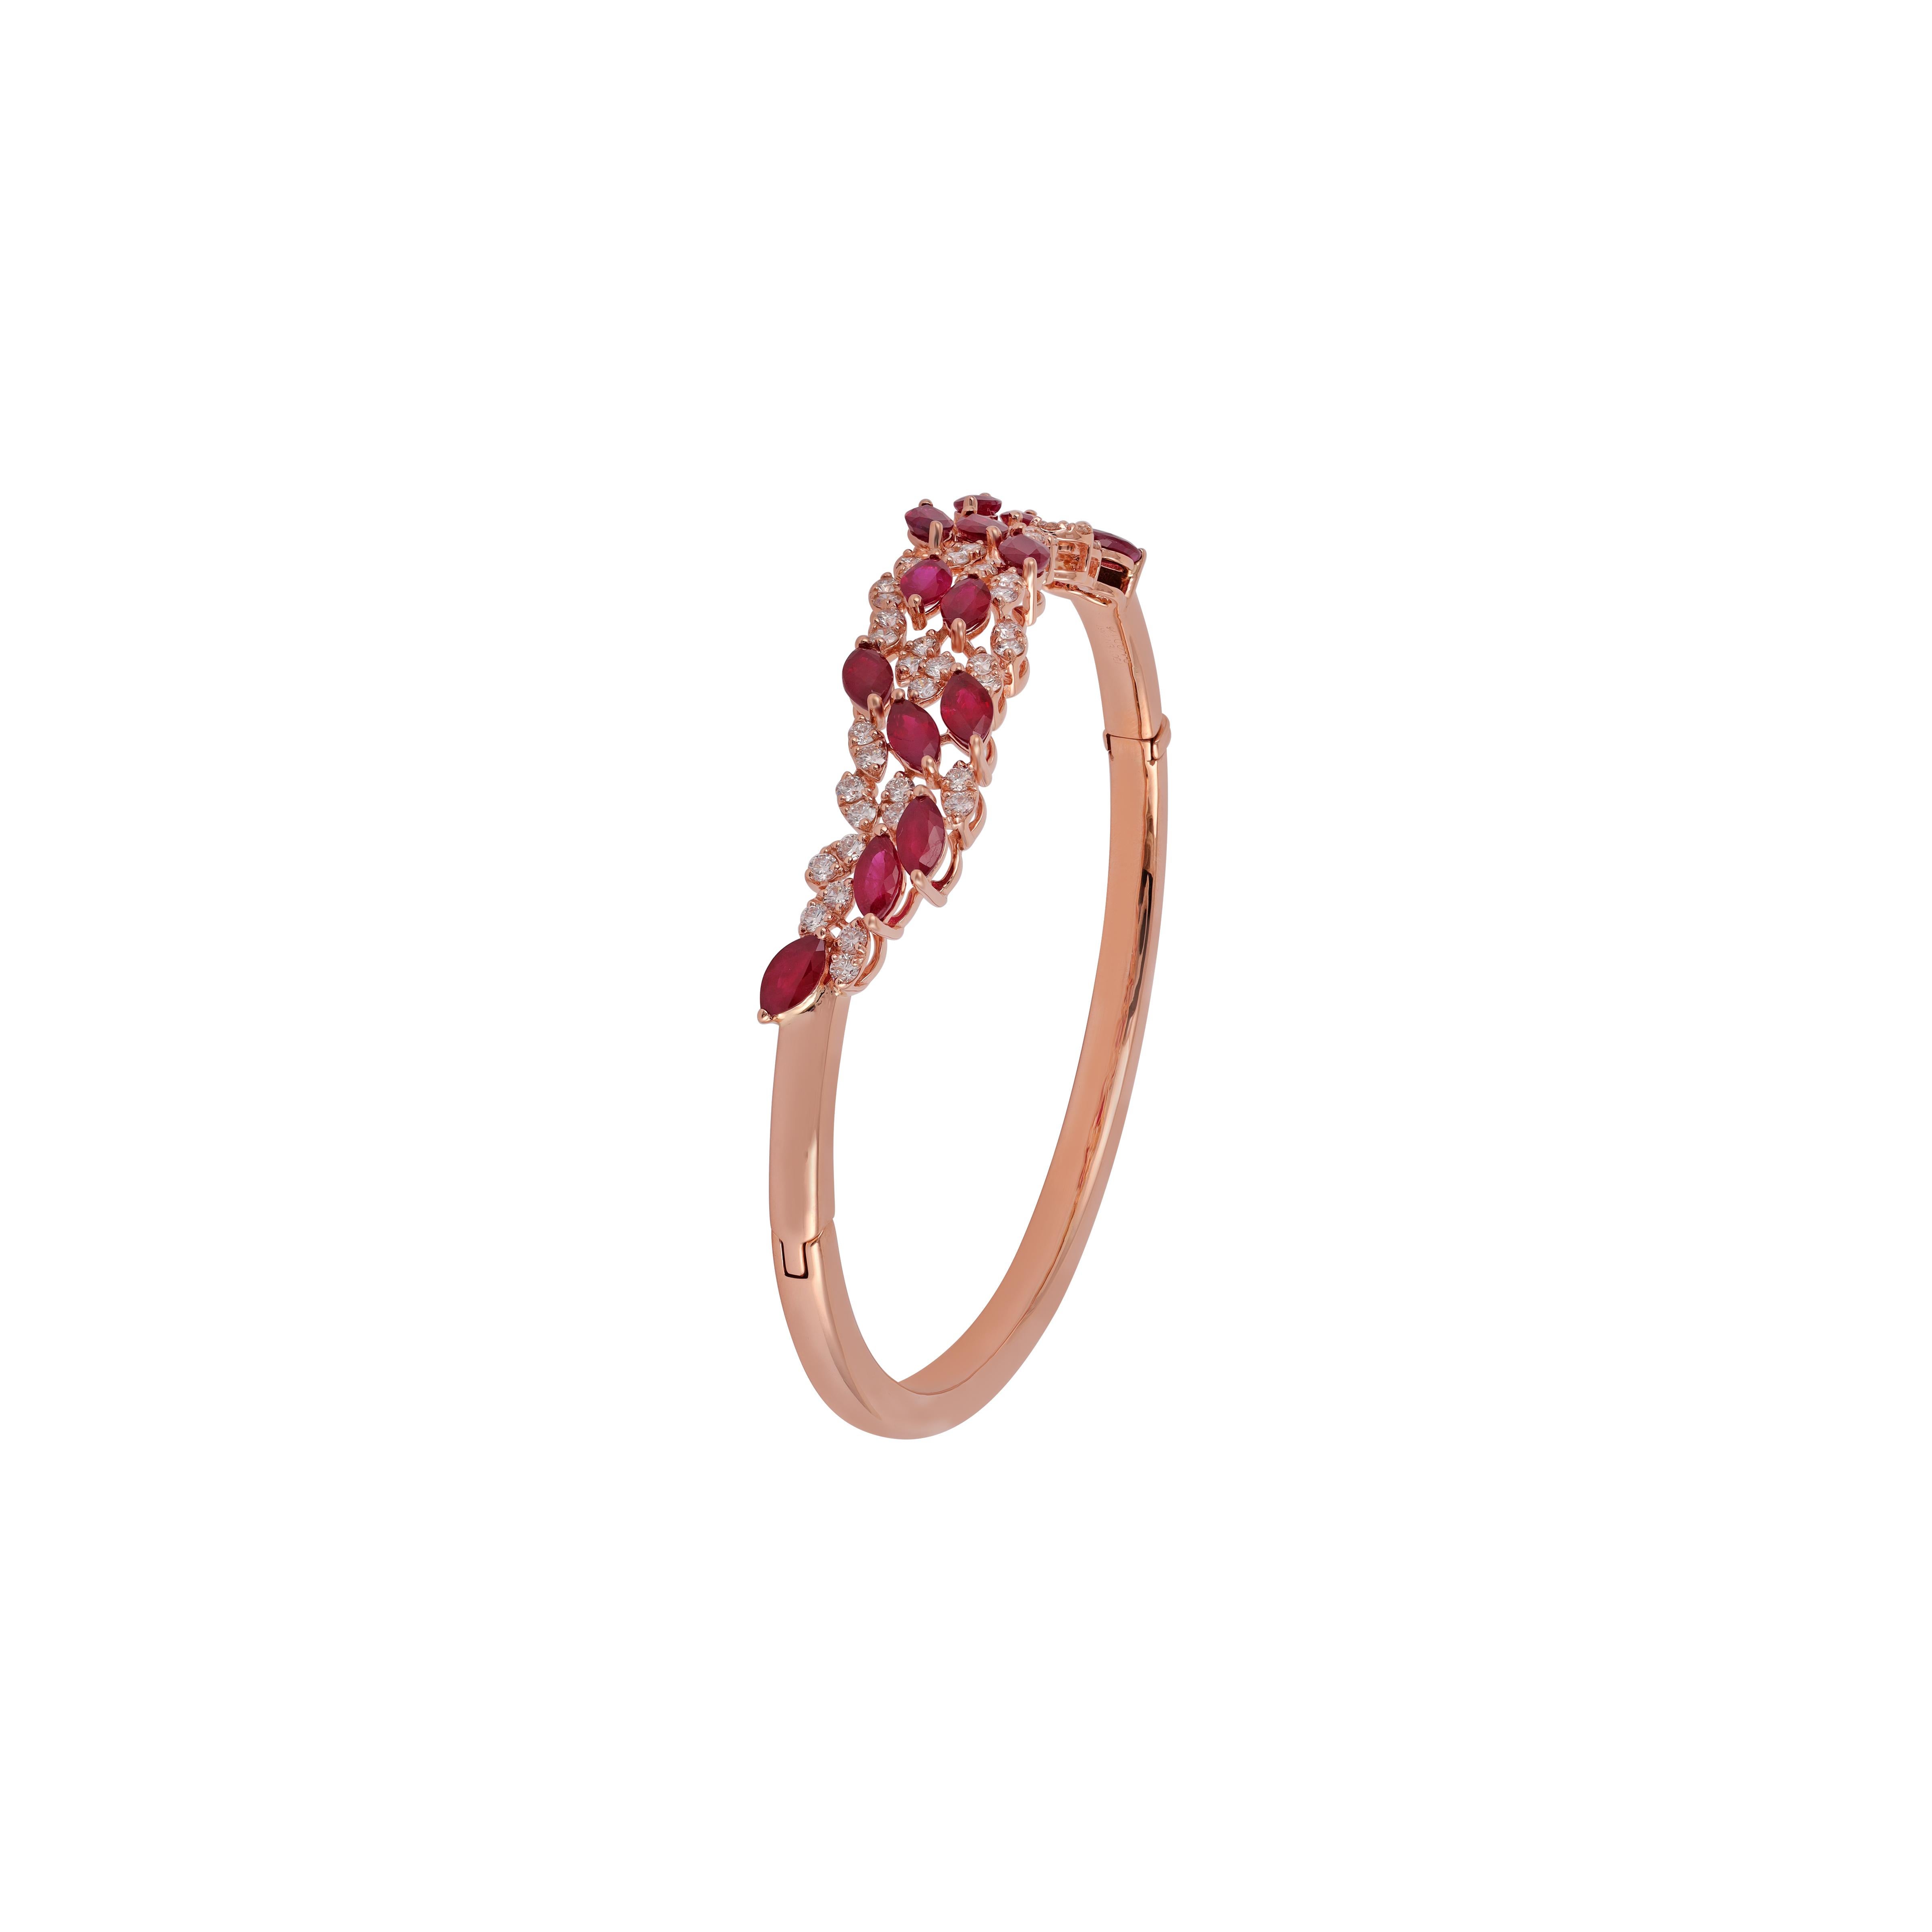 Modernist 4.29 Carat Natural Burma Ruby Bangle with Diamonds in 18k Rose Gold For Sale